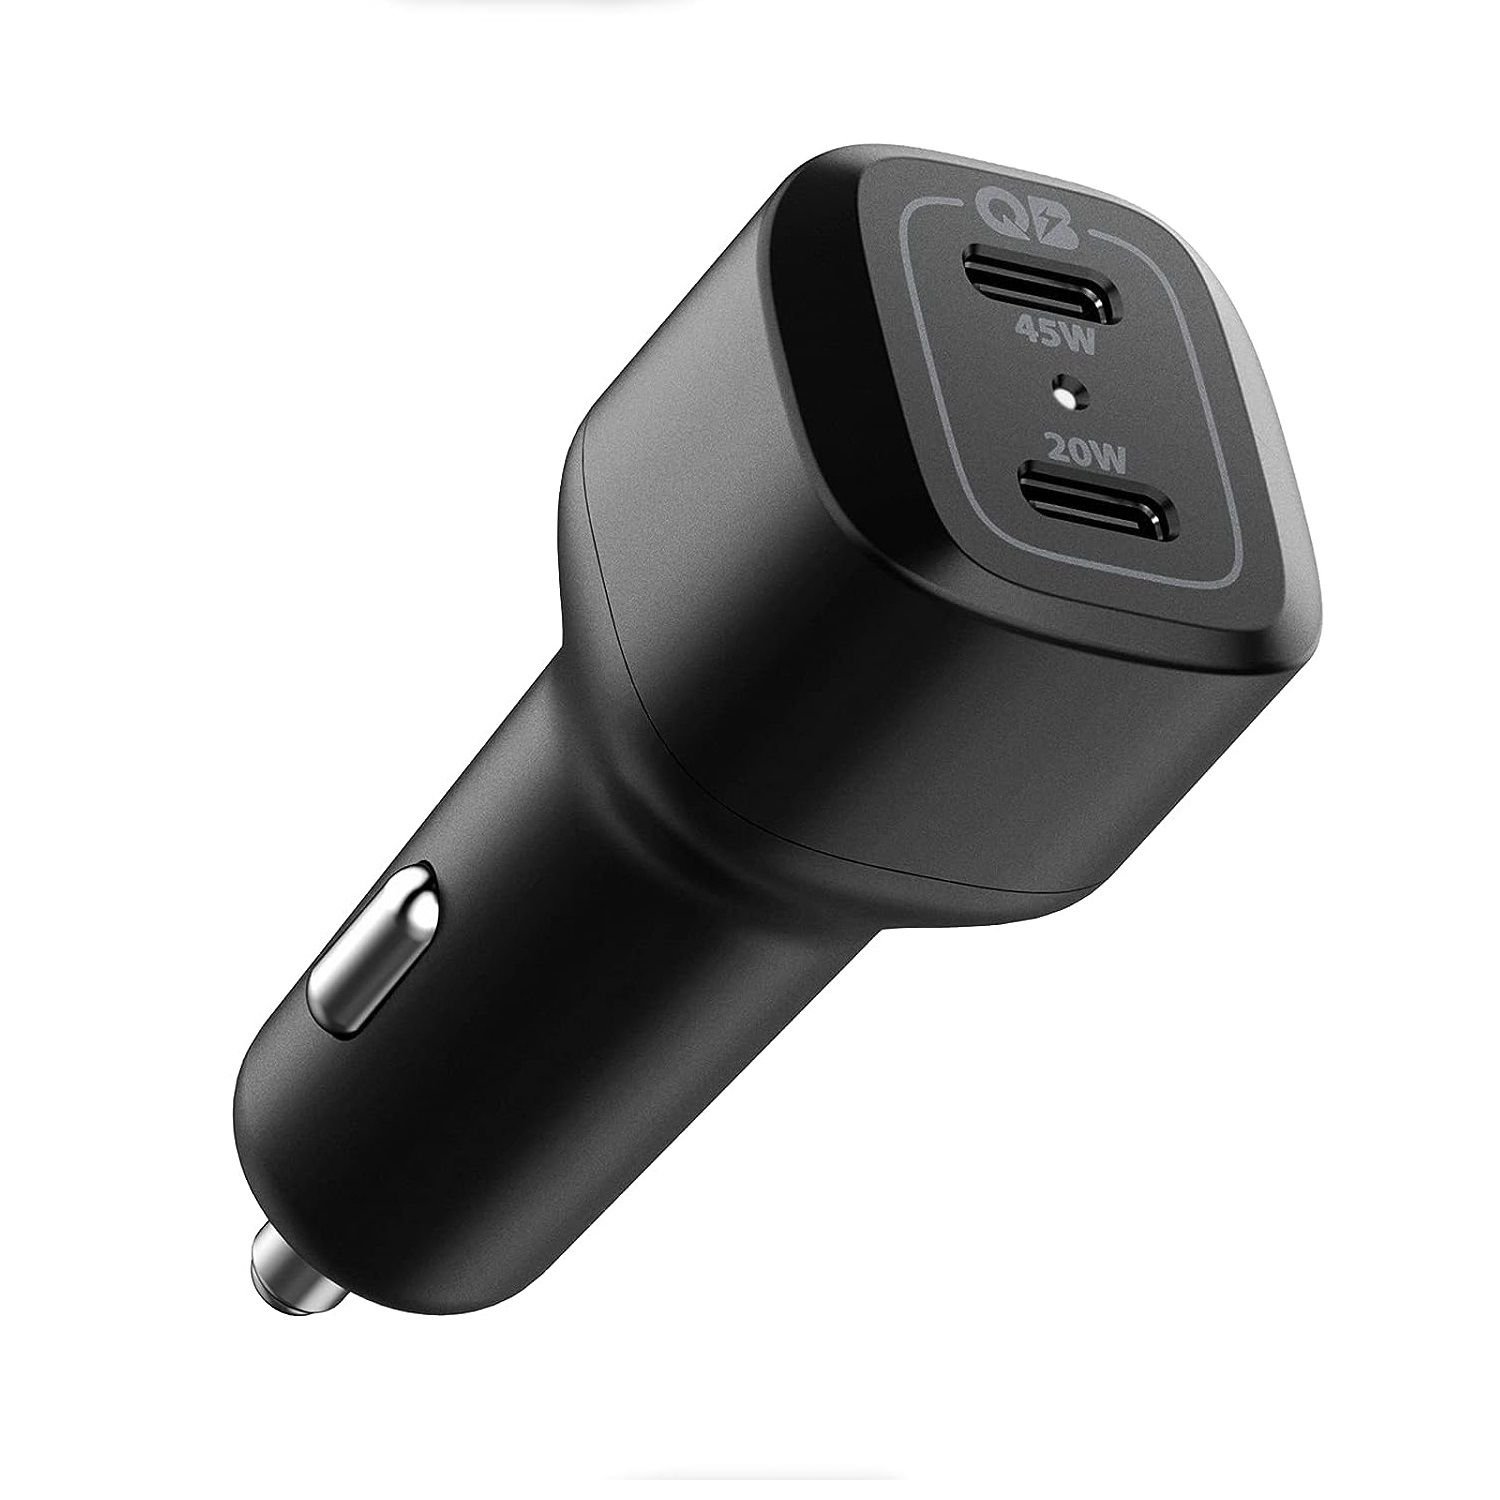 Spigen USB-C Car Charger, positioned at an angle